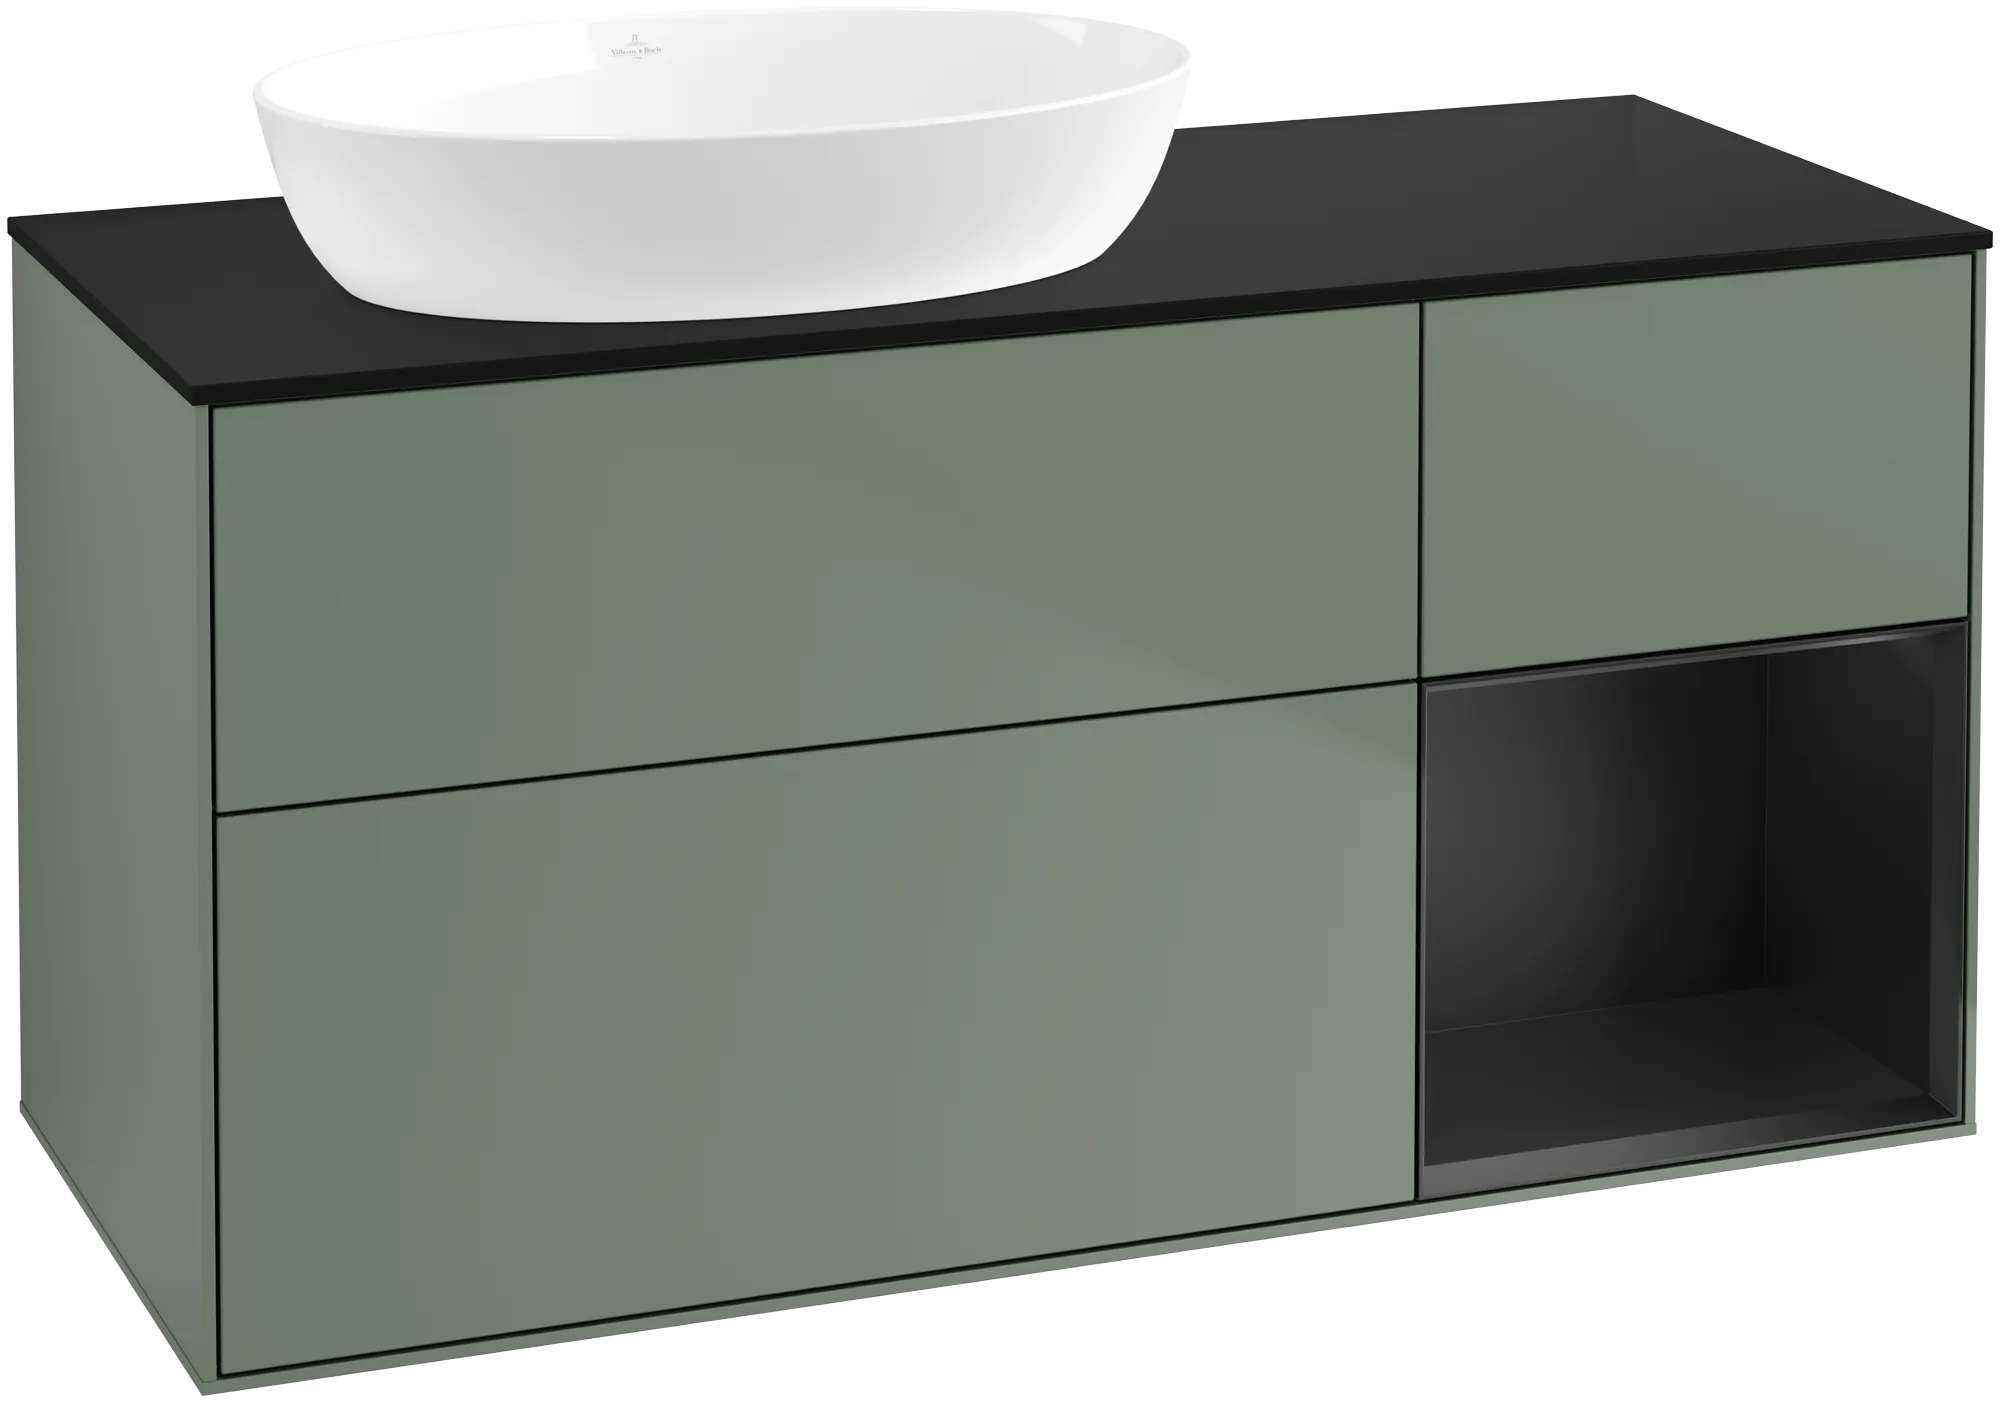 Picture of VILLEROY BOCH Finion Vanity unit, with lighting, 3 pull-out compartments, 1200 x 603 x 501 mm, Olive Matt Lacquer / Black Matt Lacquer / Glass Black Matt #FA52PDGM